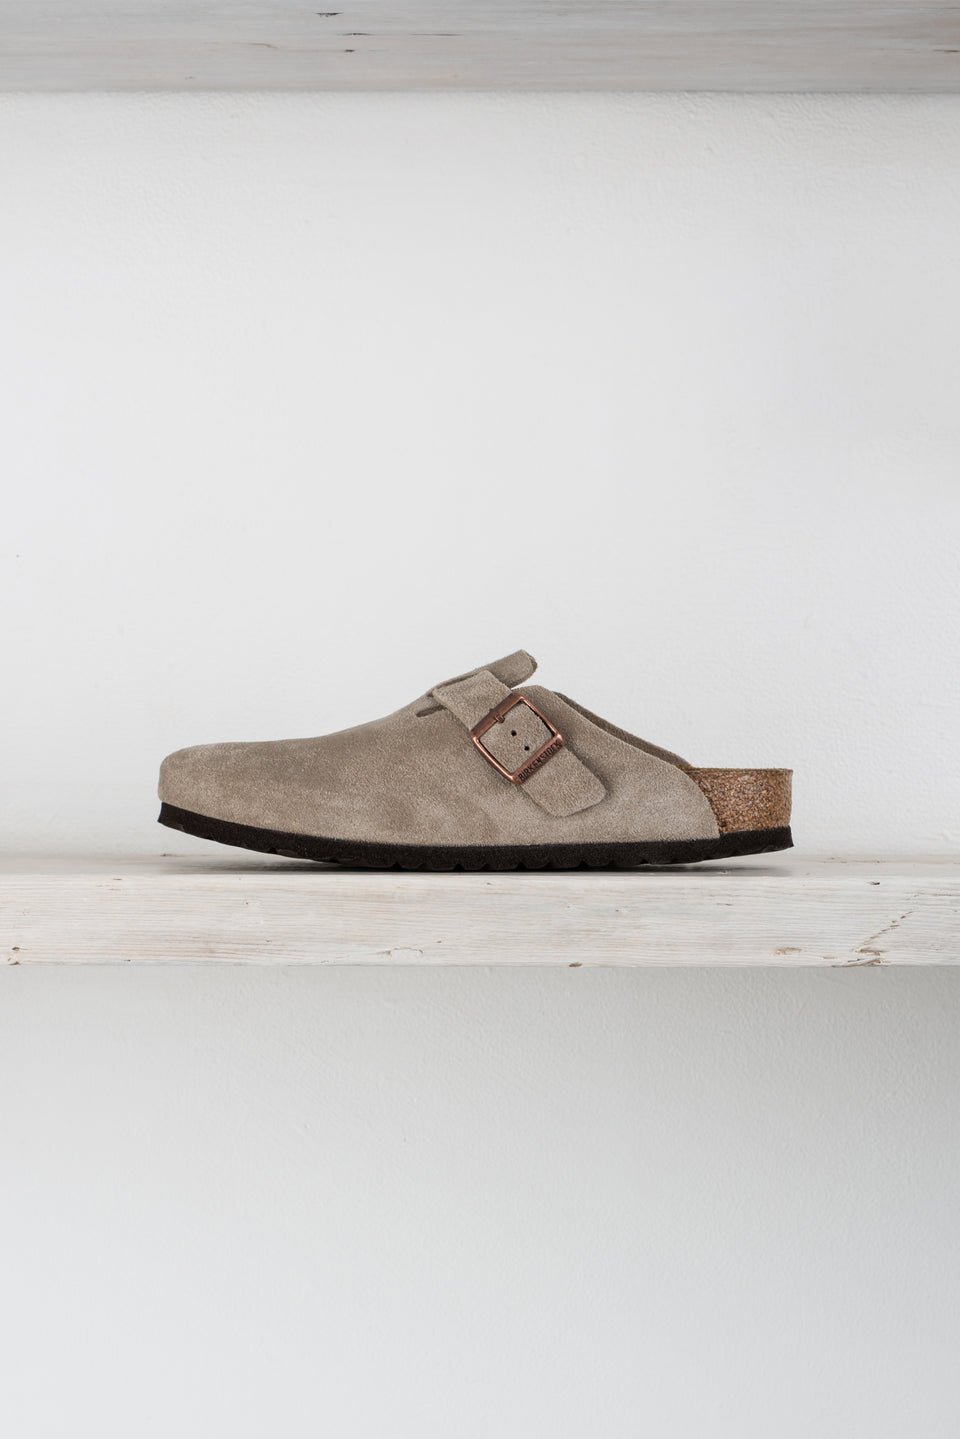 Arizona Soft Footbed Suede Leather Taupe | BIRKENSTOCK